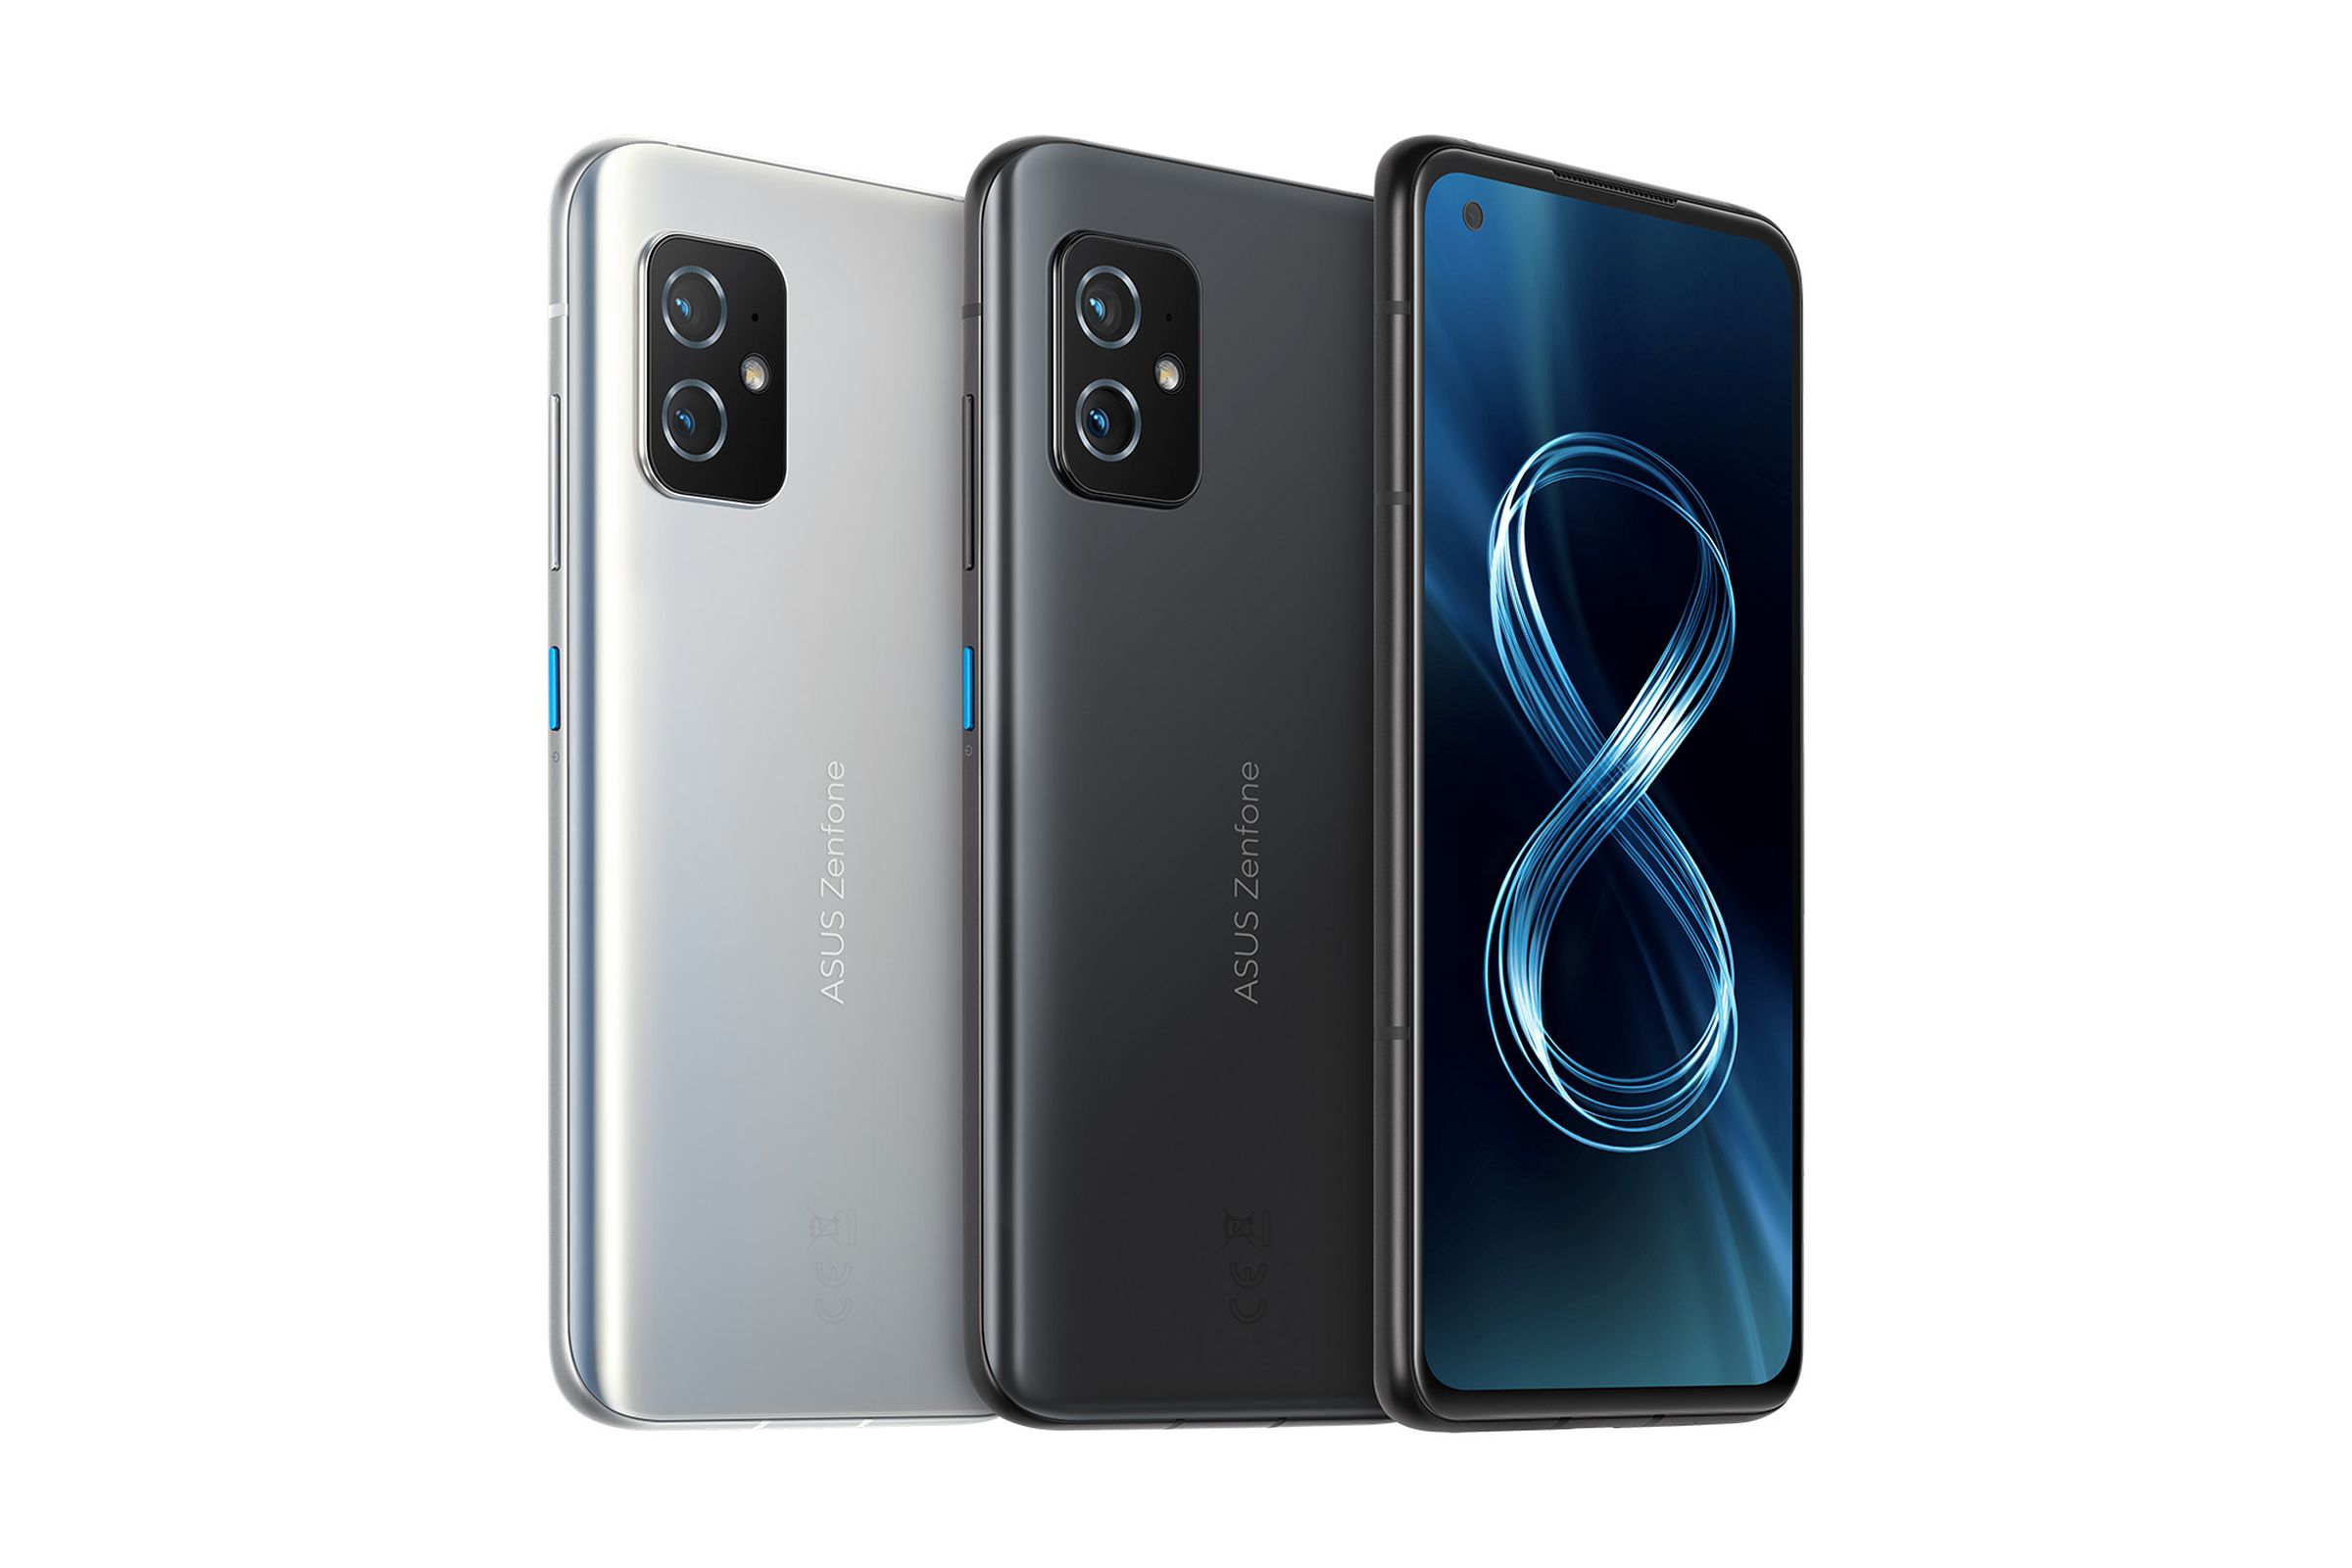 The ZenFone 8 offers just two fixed rear-facing cameras.